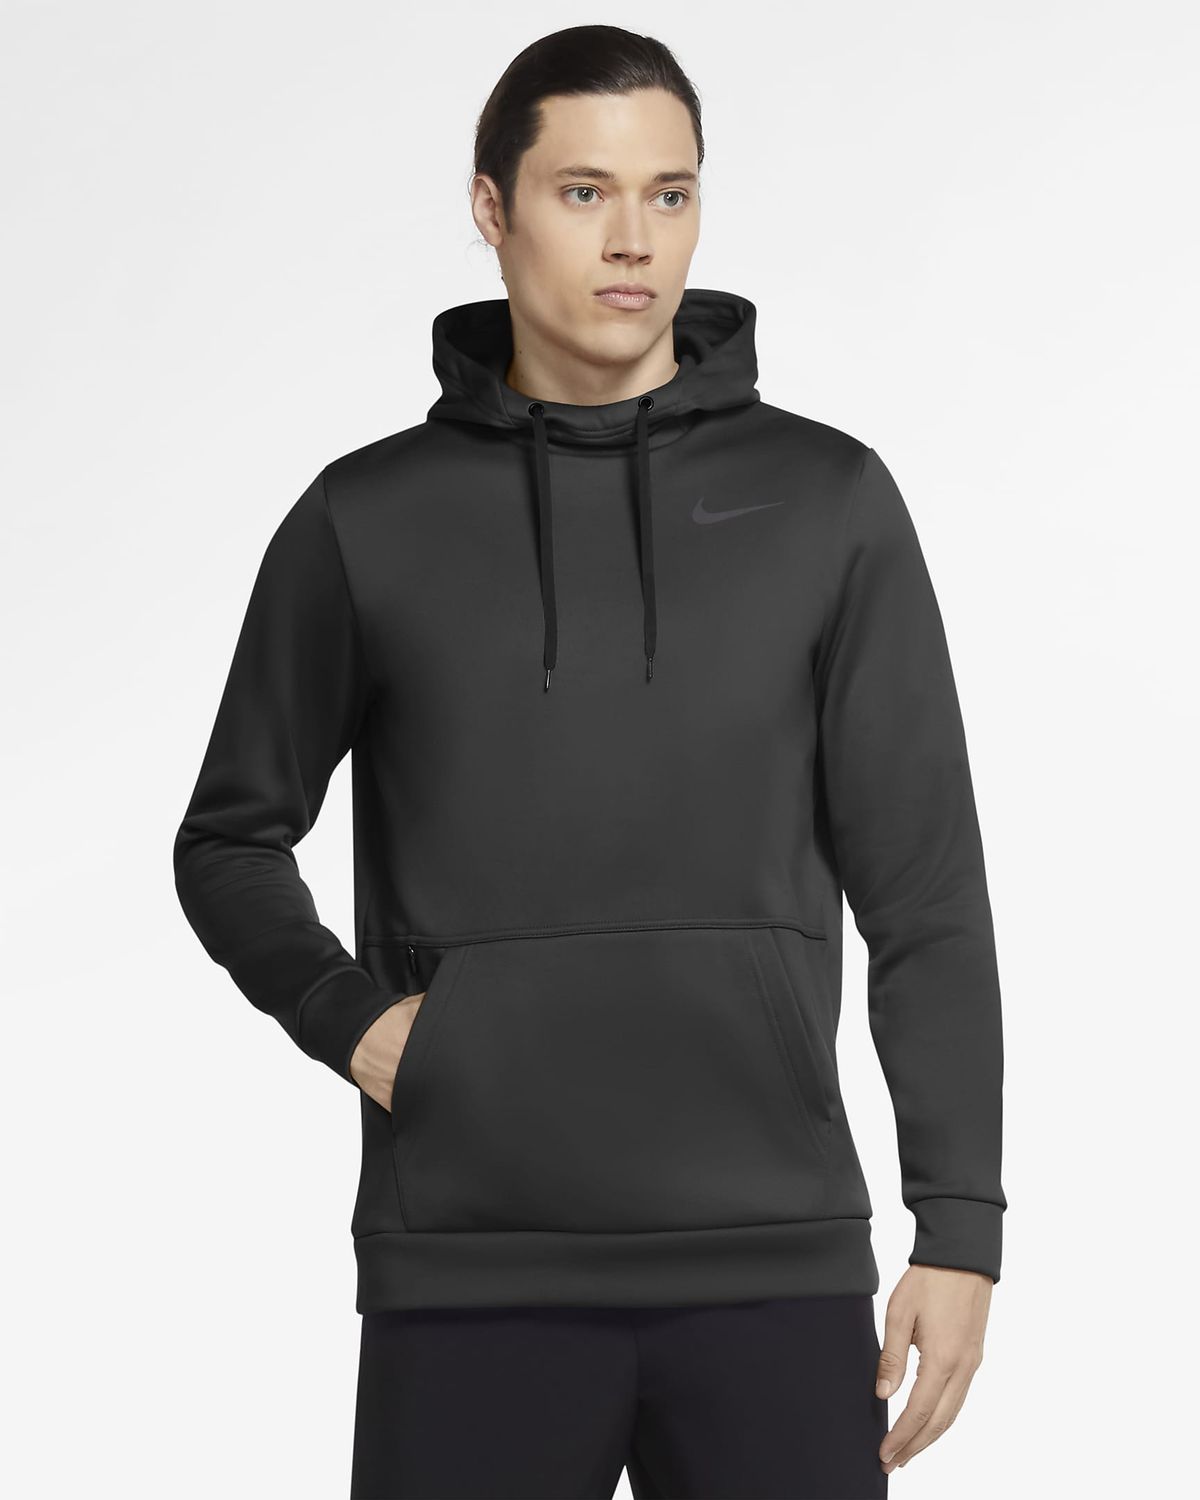 Nike Cyber Monday deals 2020 | Tom's Guide